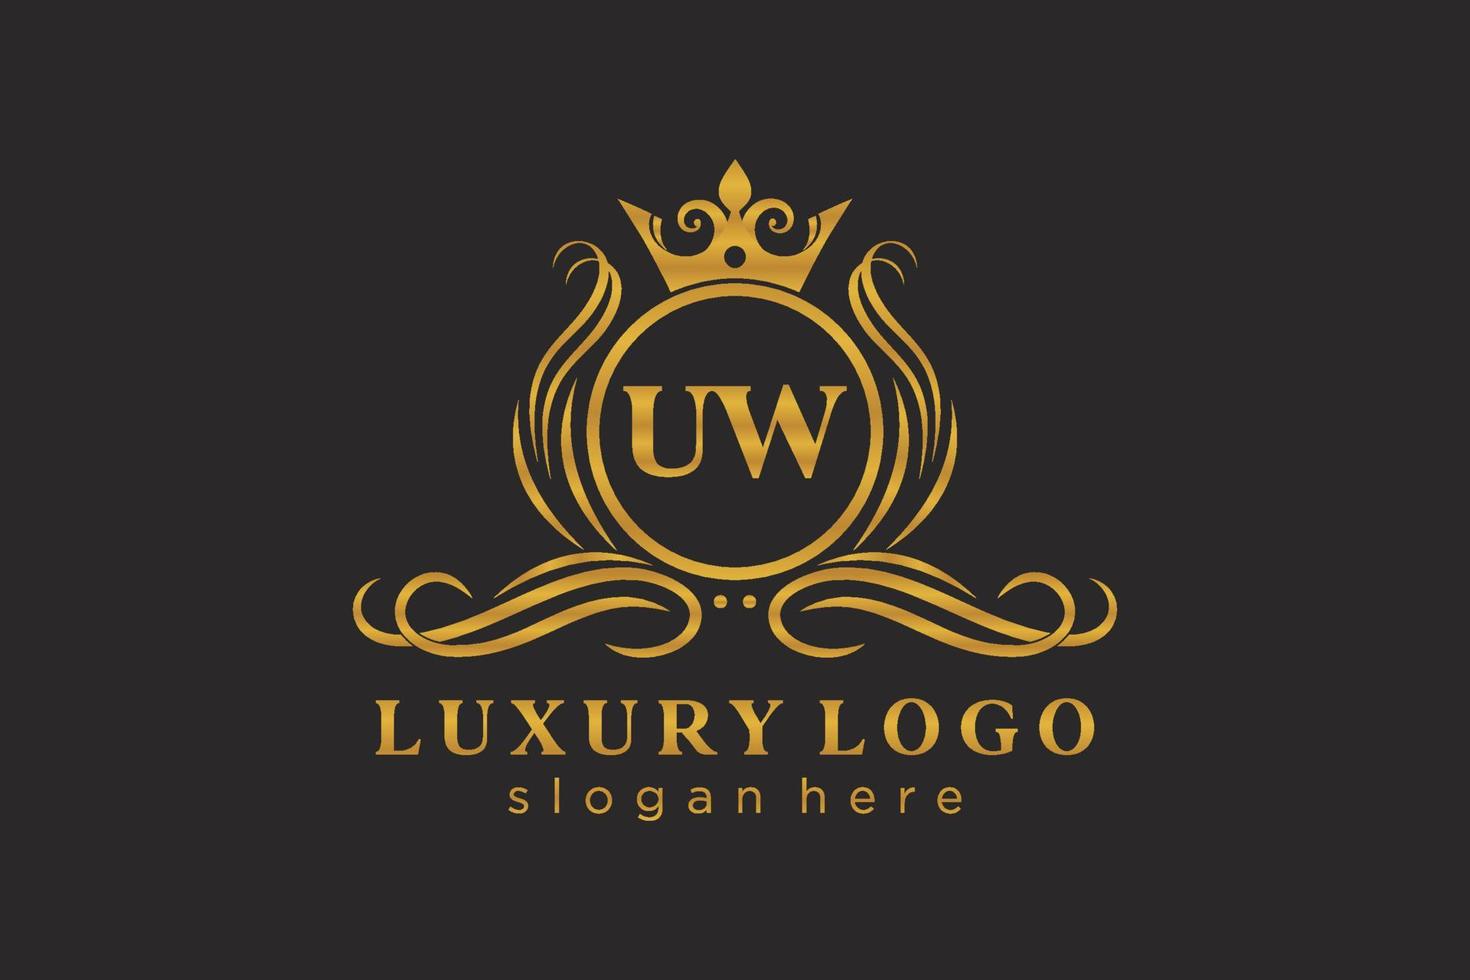 Initial UW Letter Royal Luxury Logo template in vector art for Restaurant, Royalty, Boutique, Cafe, Hotel, Heraldic, Jewelry, Fashion and other vector illustration.